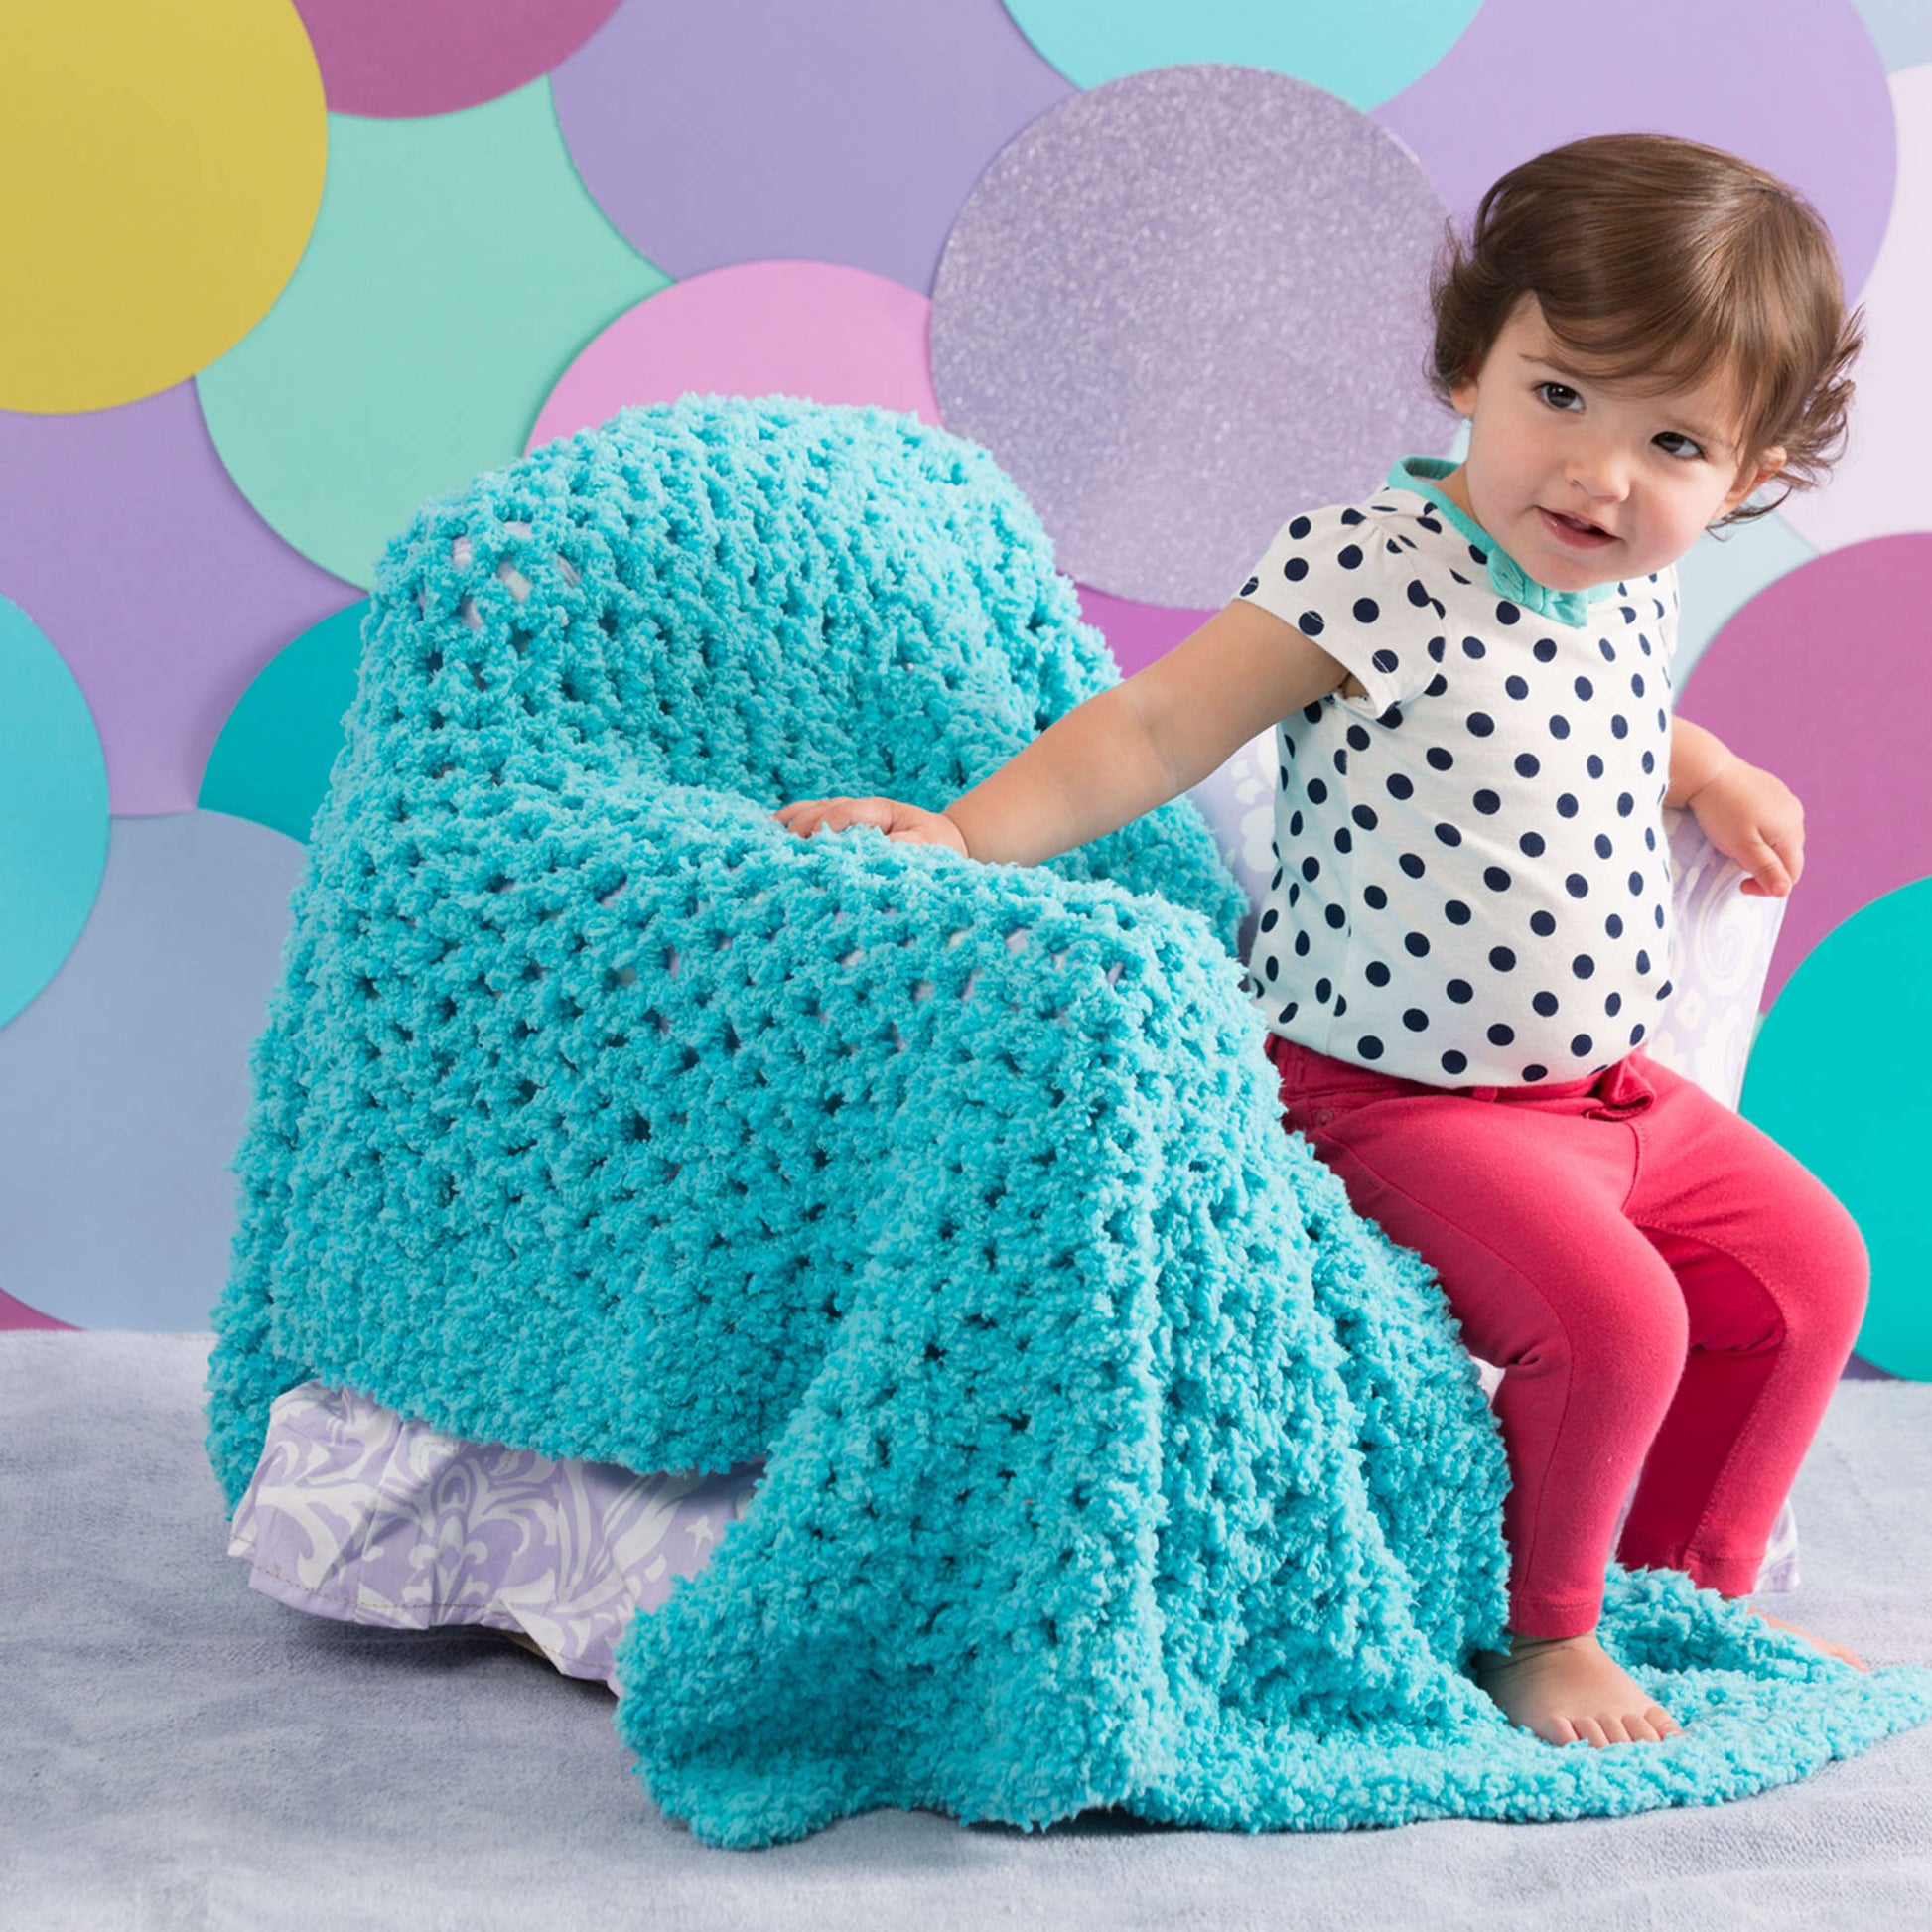 Free Red Heart Nap Time Crochet Baby Blanket Pattern